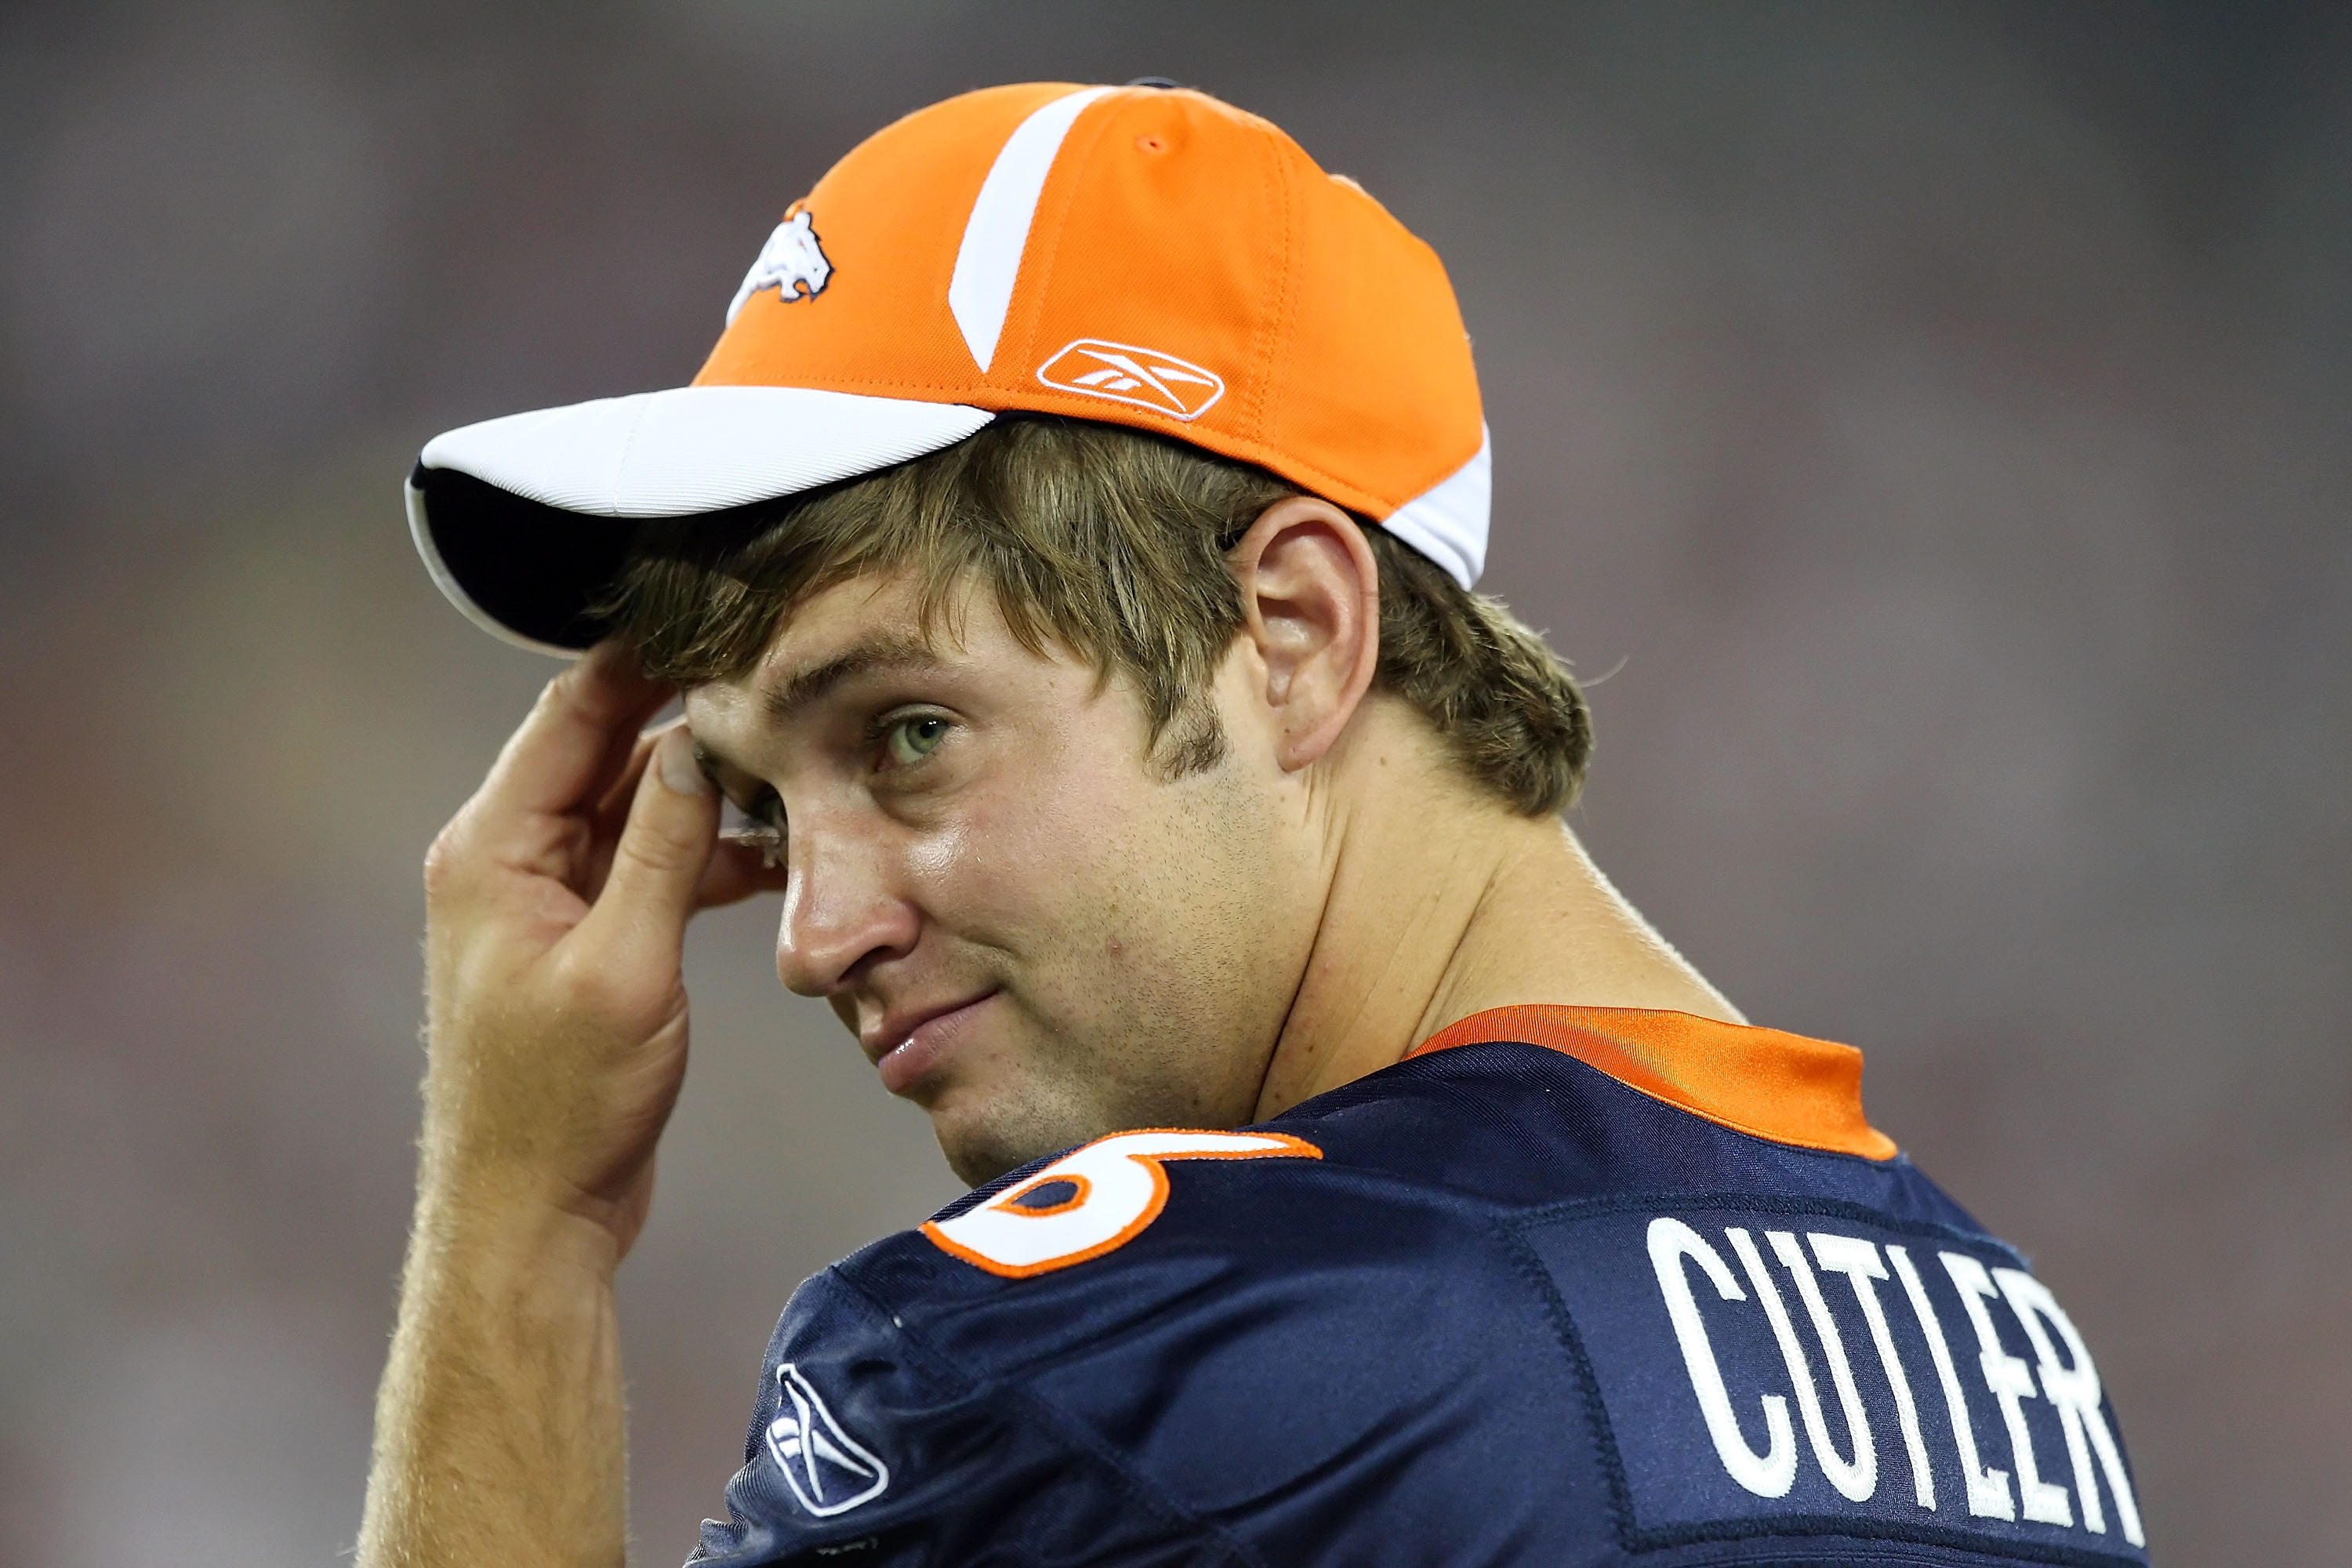 Why I Drafted Jay Cutler, and What Happened from There